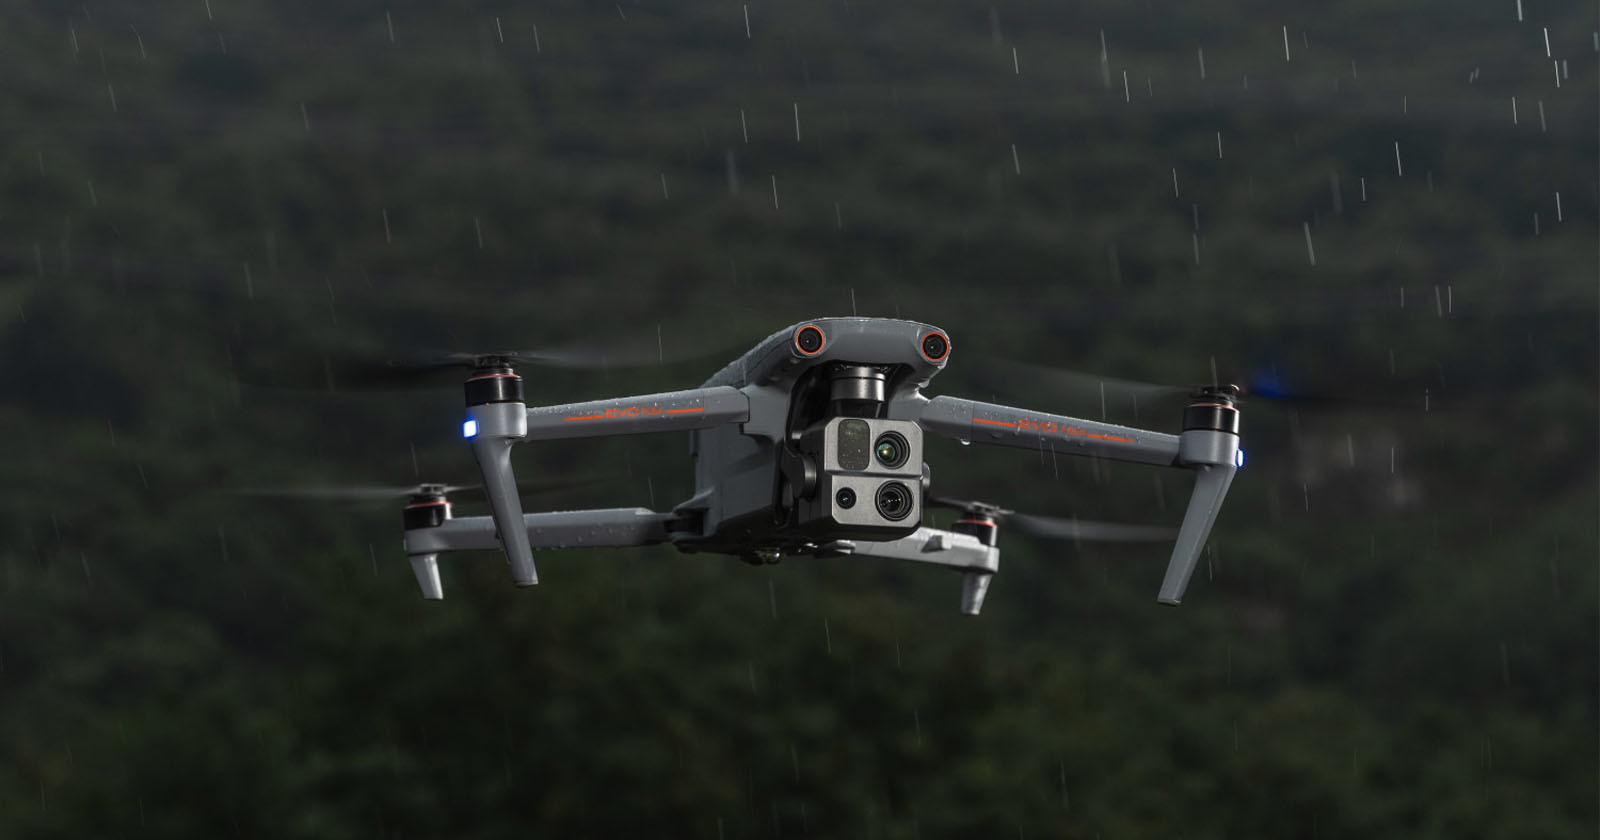 Autels EVO Max 4T Drone Has Three Cameras and Up to 10x Optical Zoom